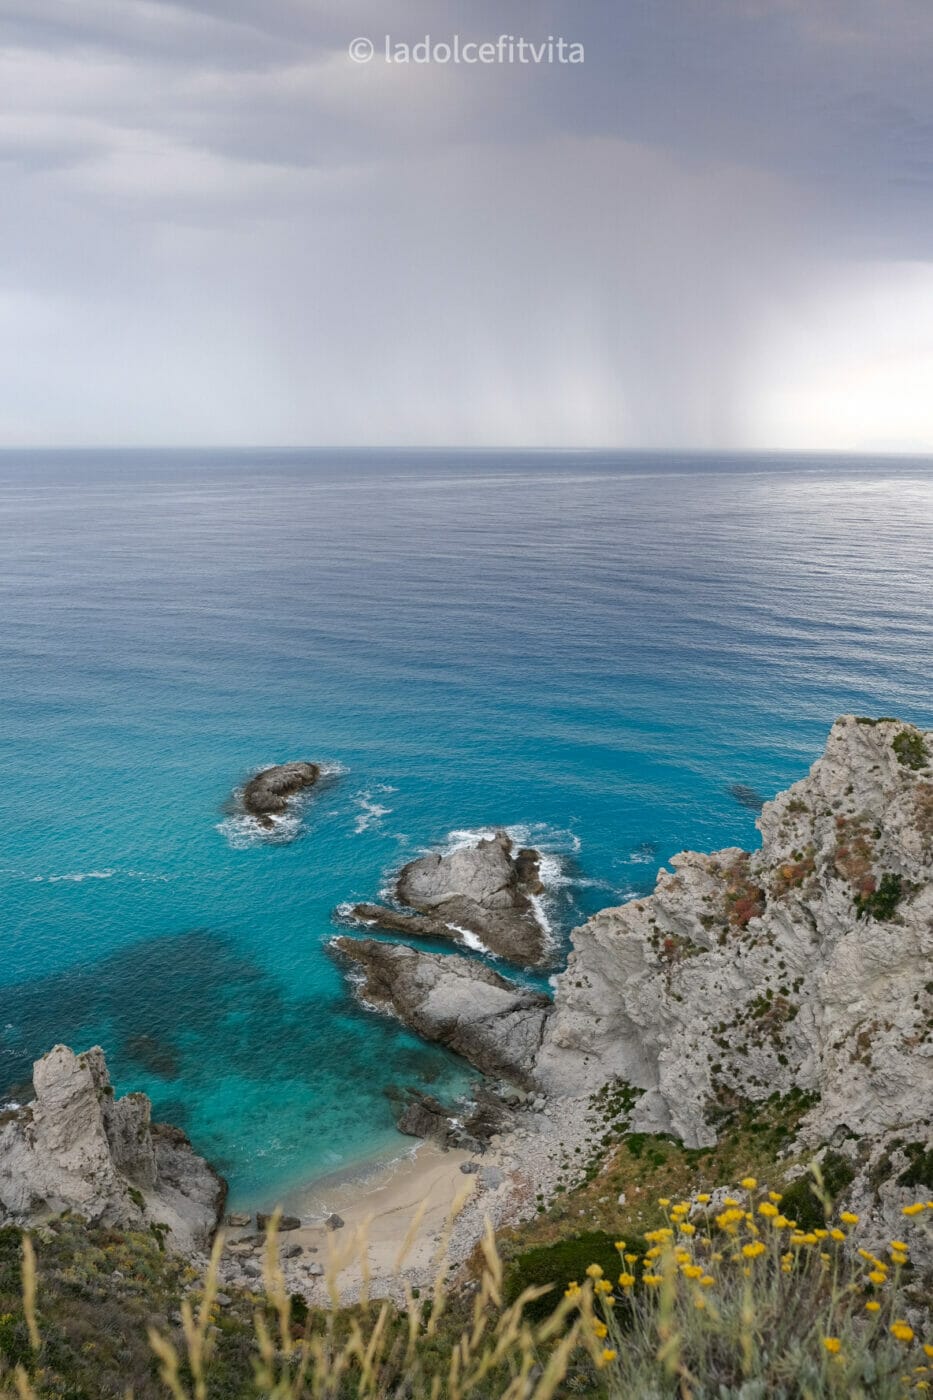 Bright turquoise waters contrasted with an ensuing storm in Capo Vaticano at Praia i Focu Beach in Calabria, Italy